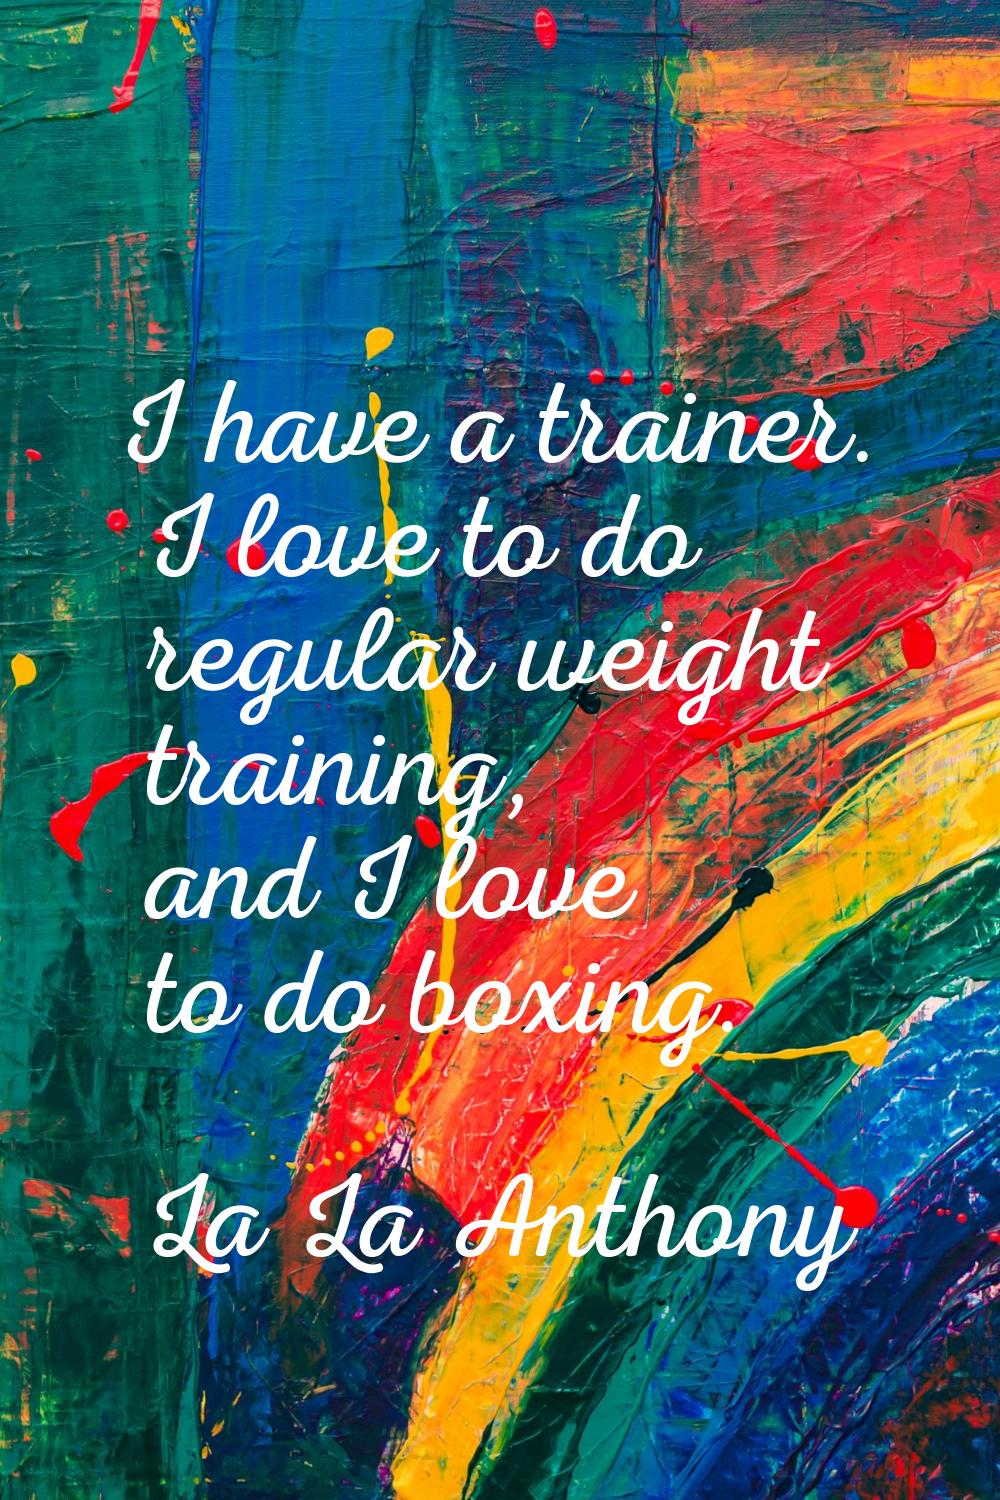 I have a trainer. I love to do regular weight training, and I love to do boxing.